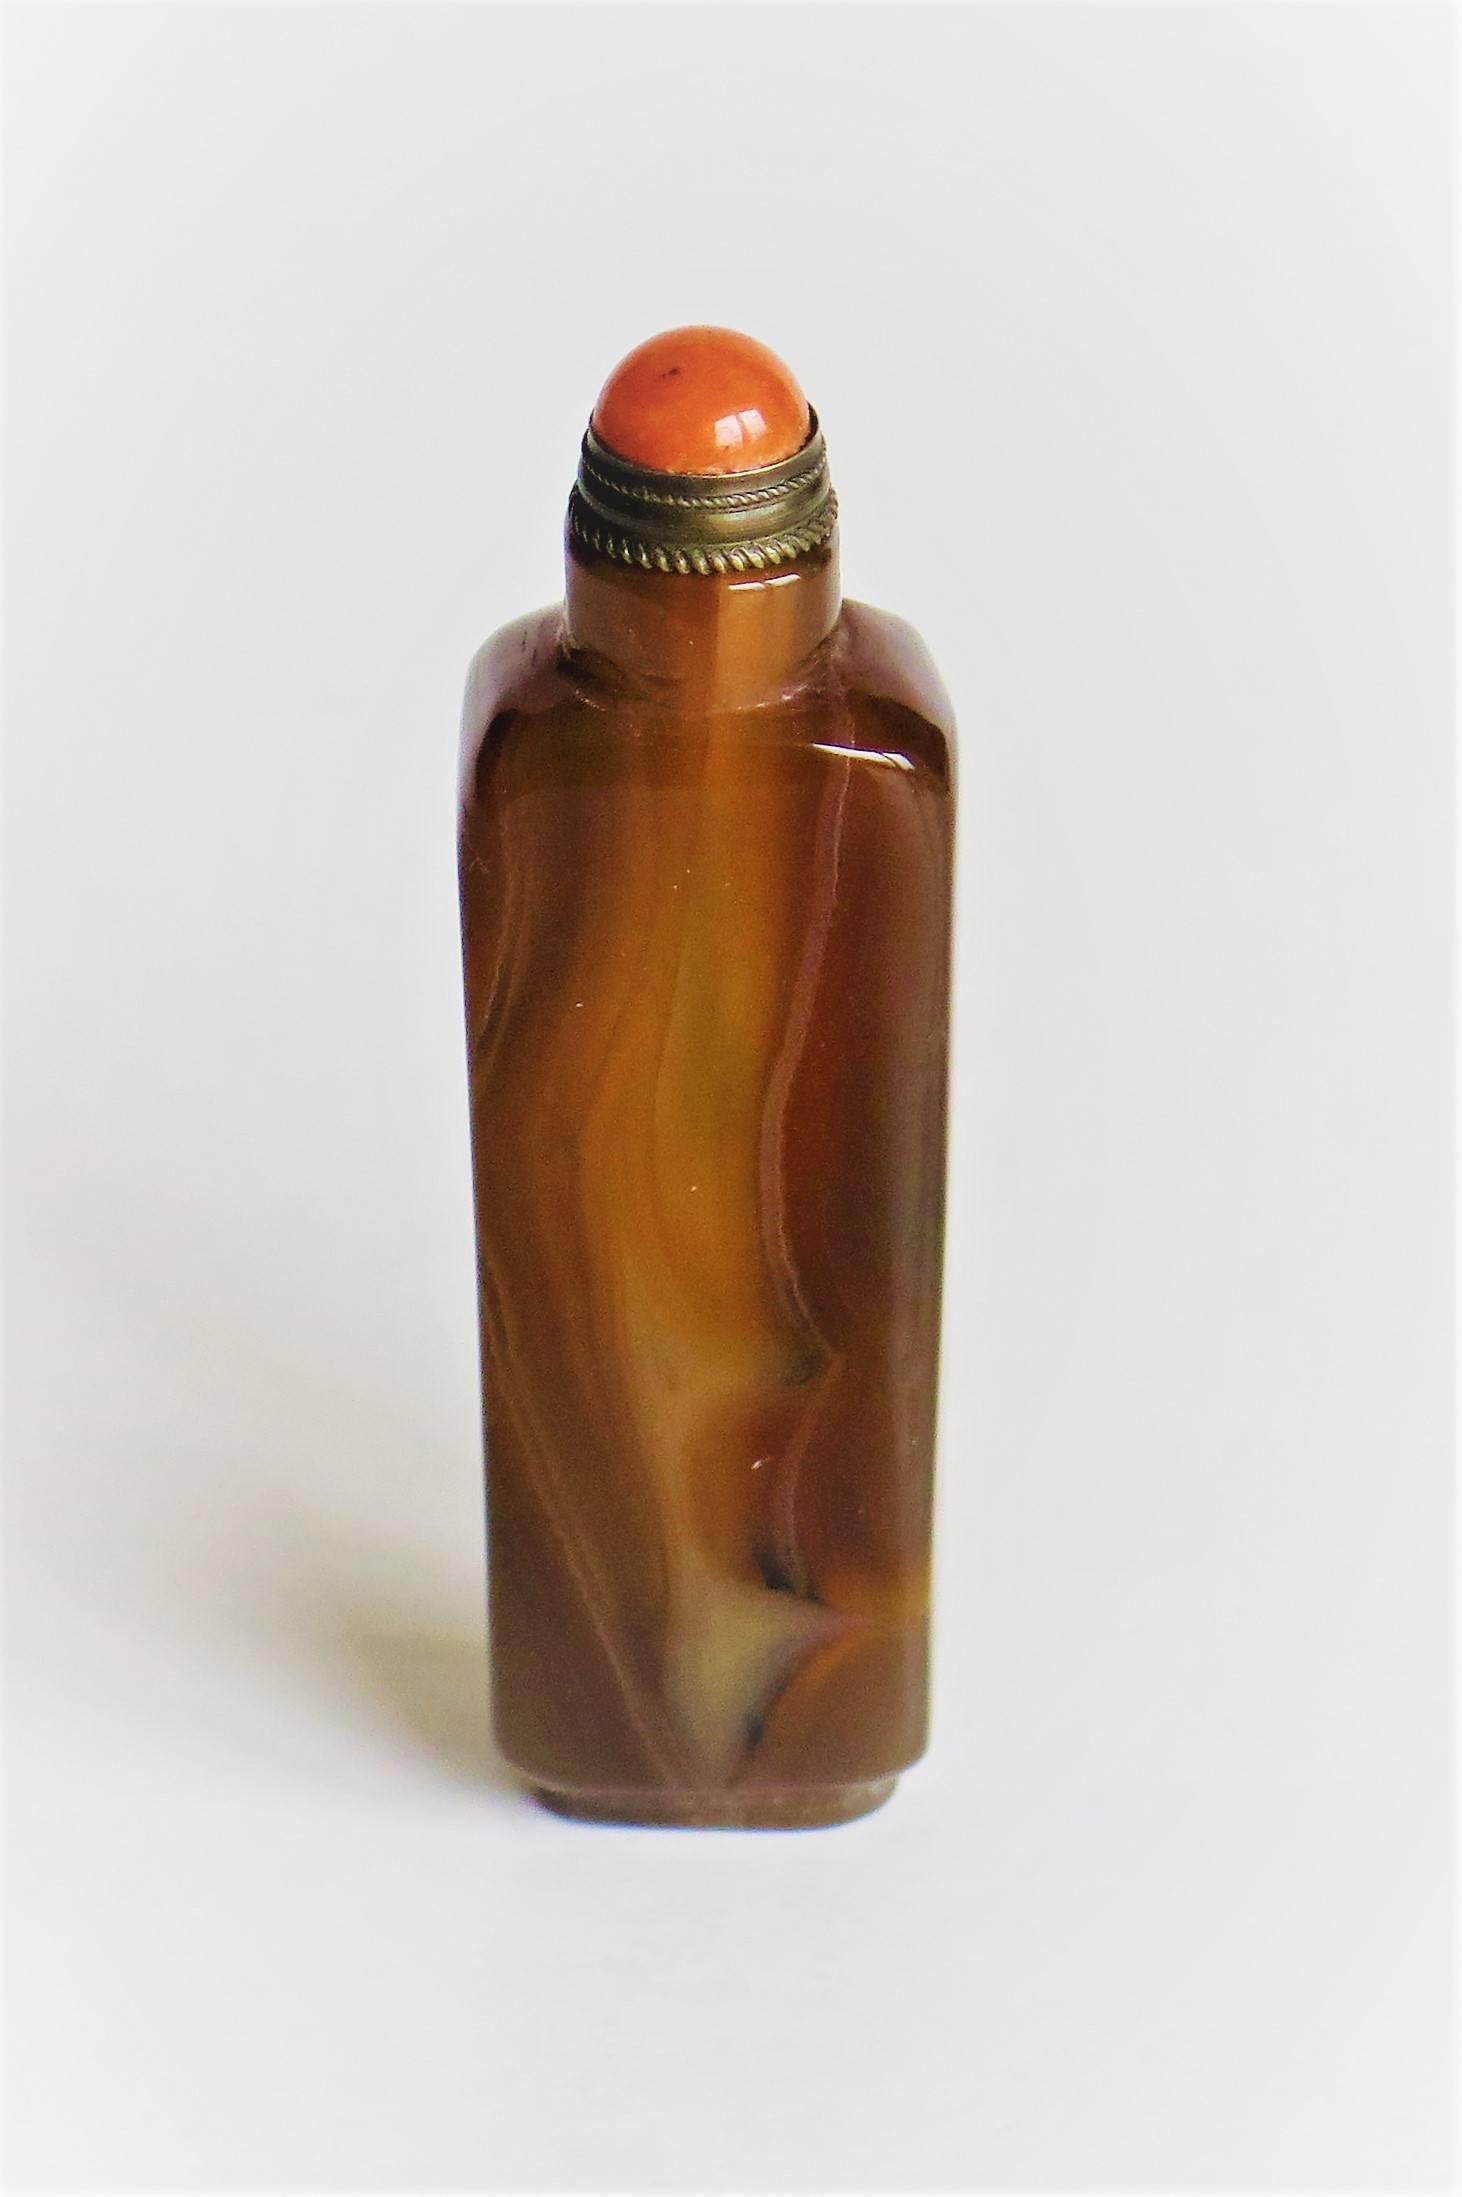 This is a good and very decorative Chinese snuff bottle from the 20th century, circa 1930.

The bottle is made of hand-carved and polished natural Jade. This Jade has an excellent natural veined texture of subtle coloring with colors of toffee /